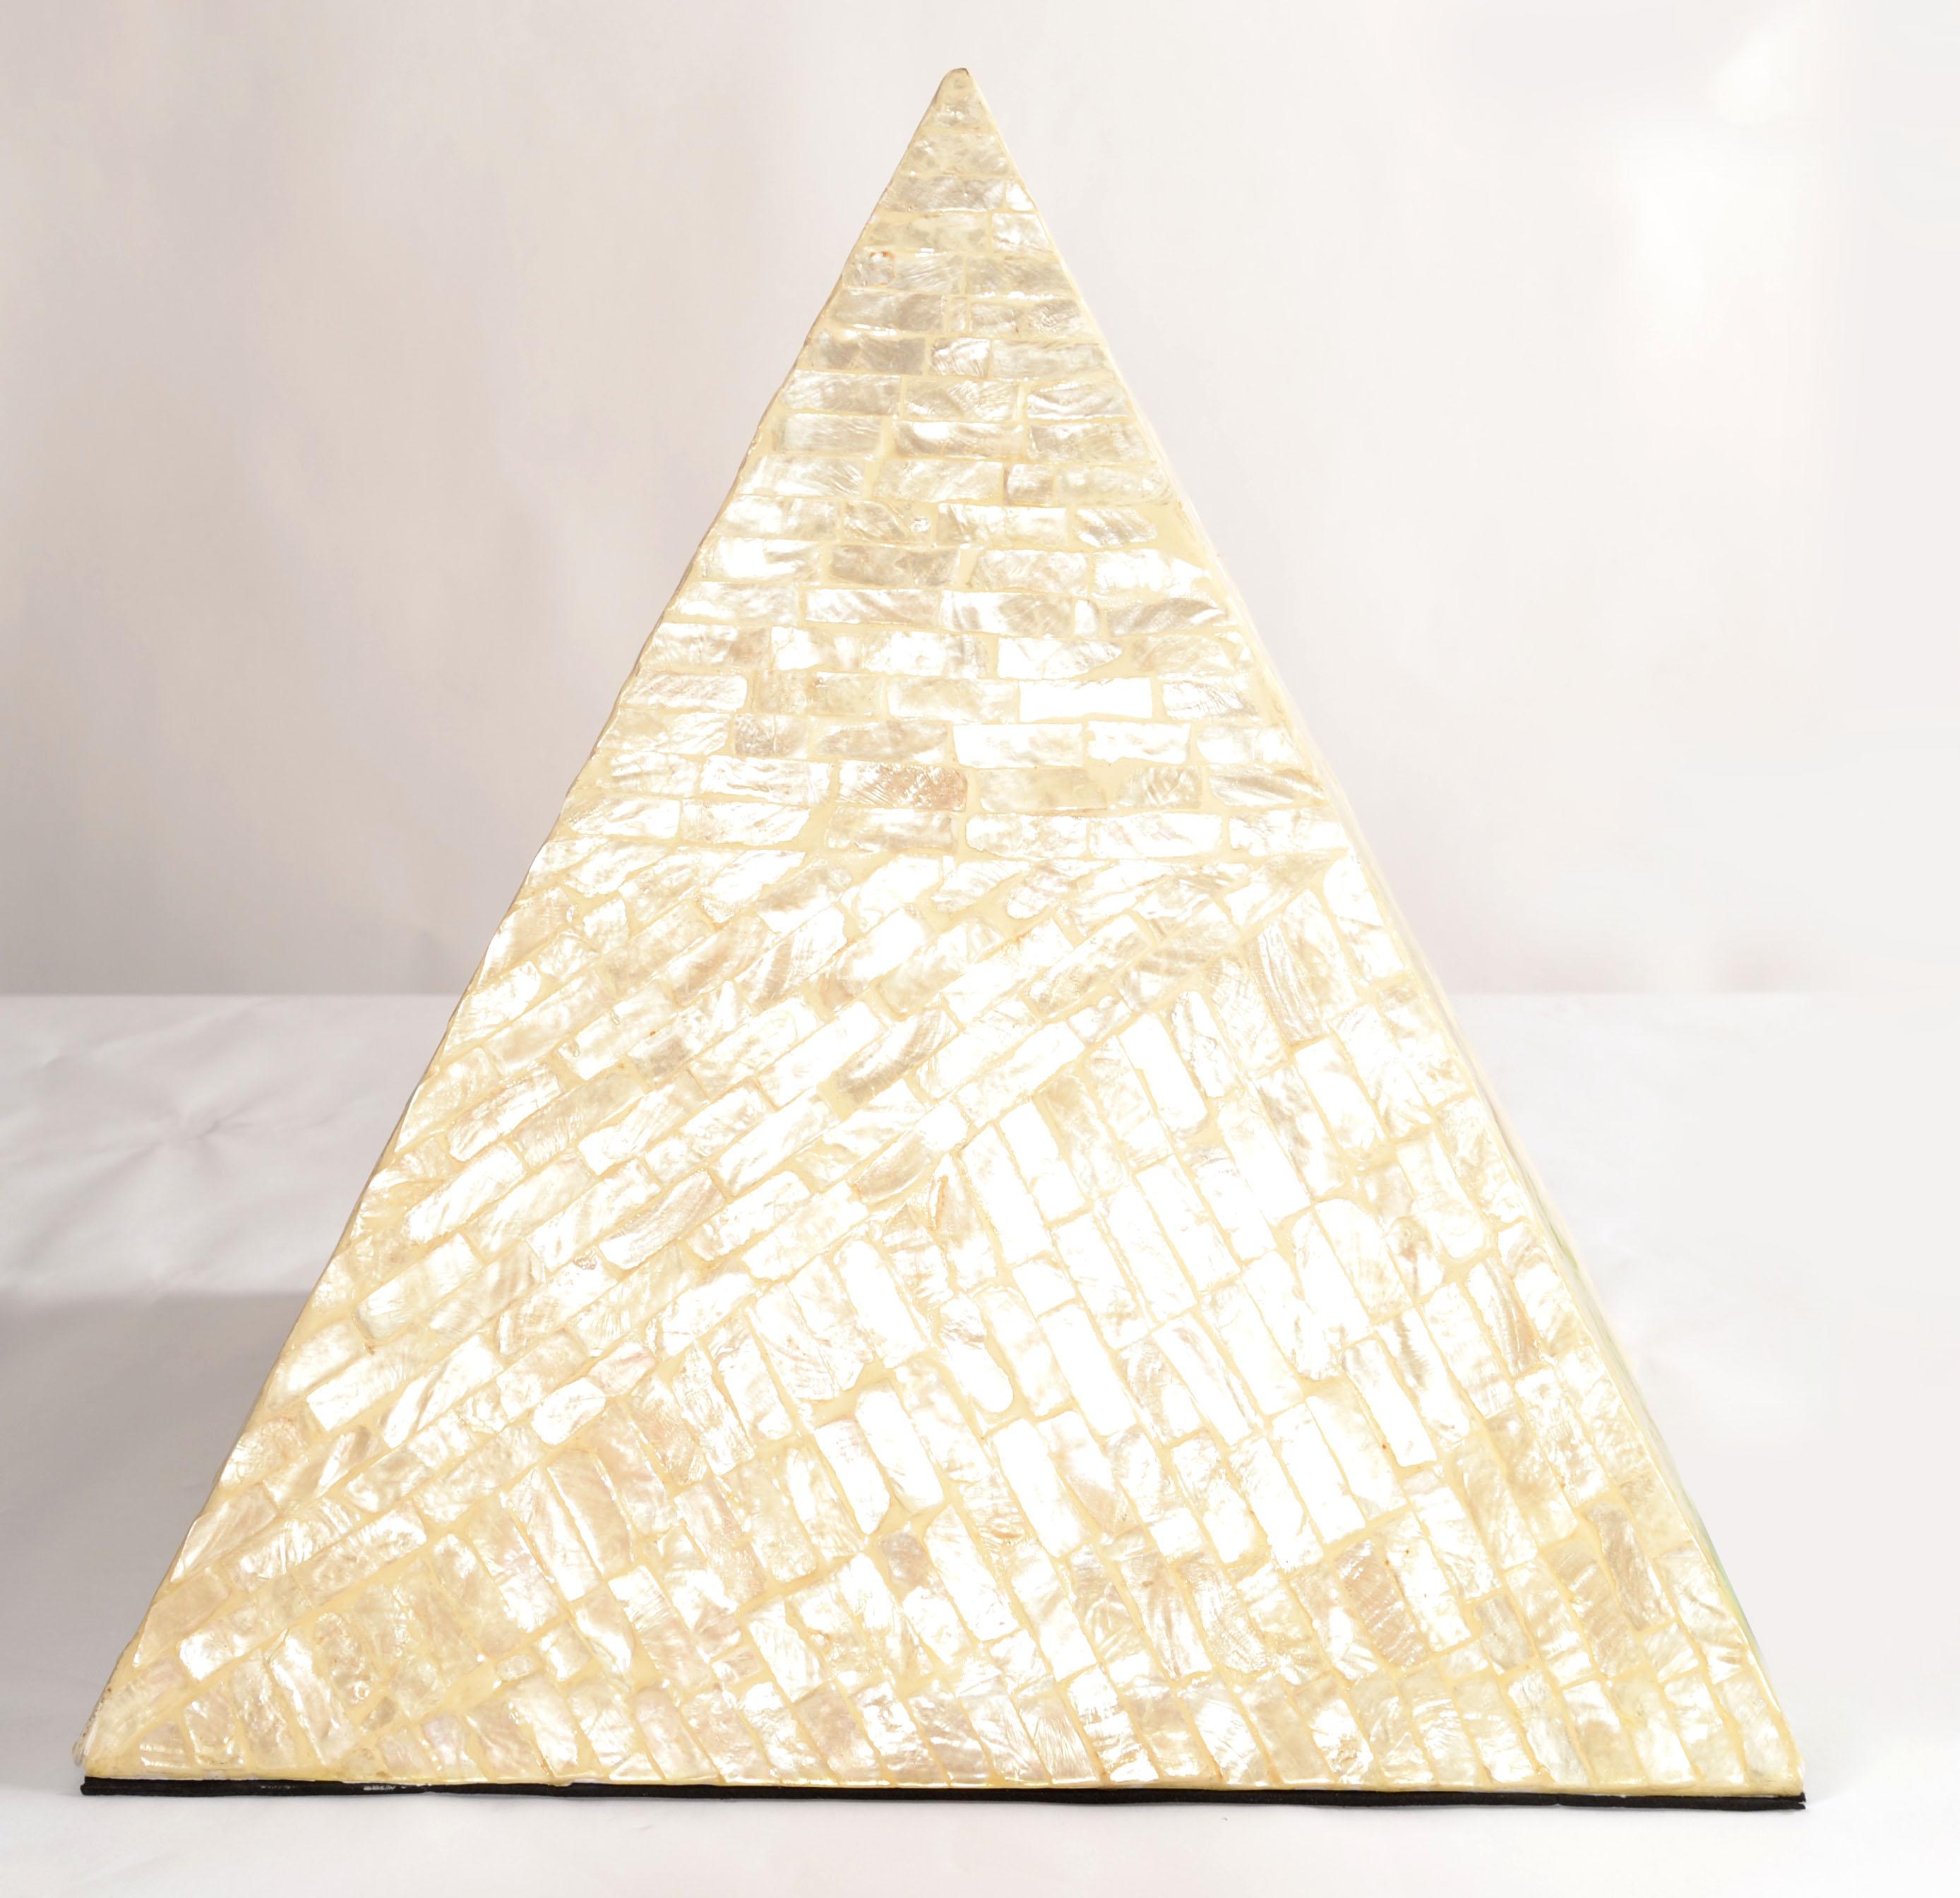 1980s Italian Pyramid Mother Of Pearl Wood Sculpture Decorative Object Fine Art  In Good Condition For Sale In Miami, FL